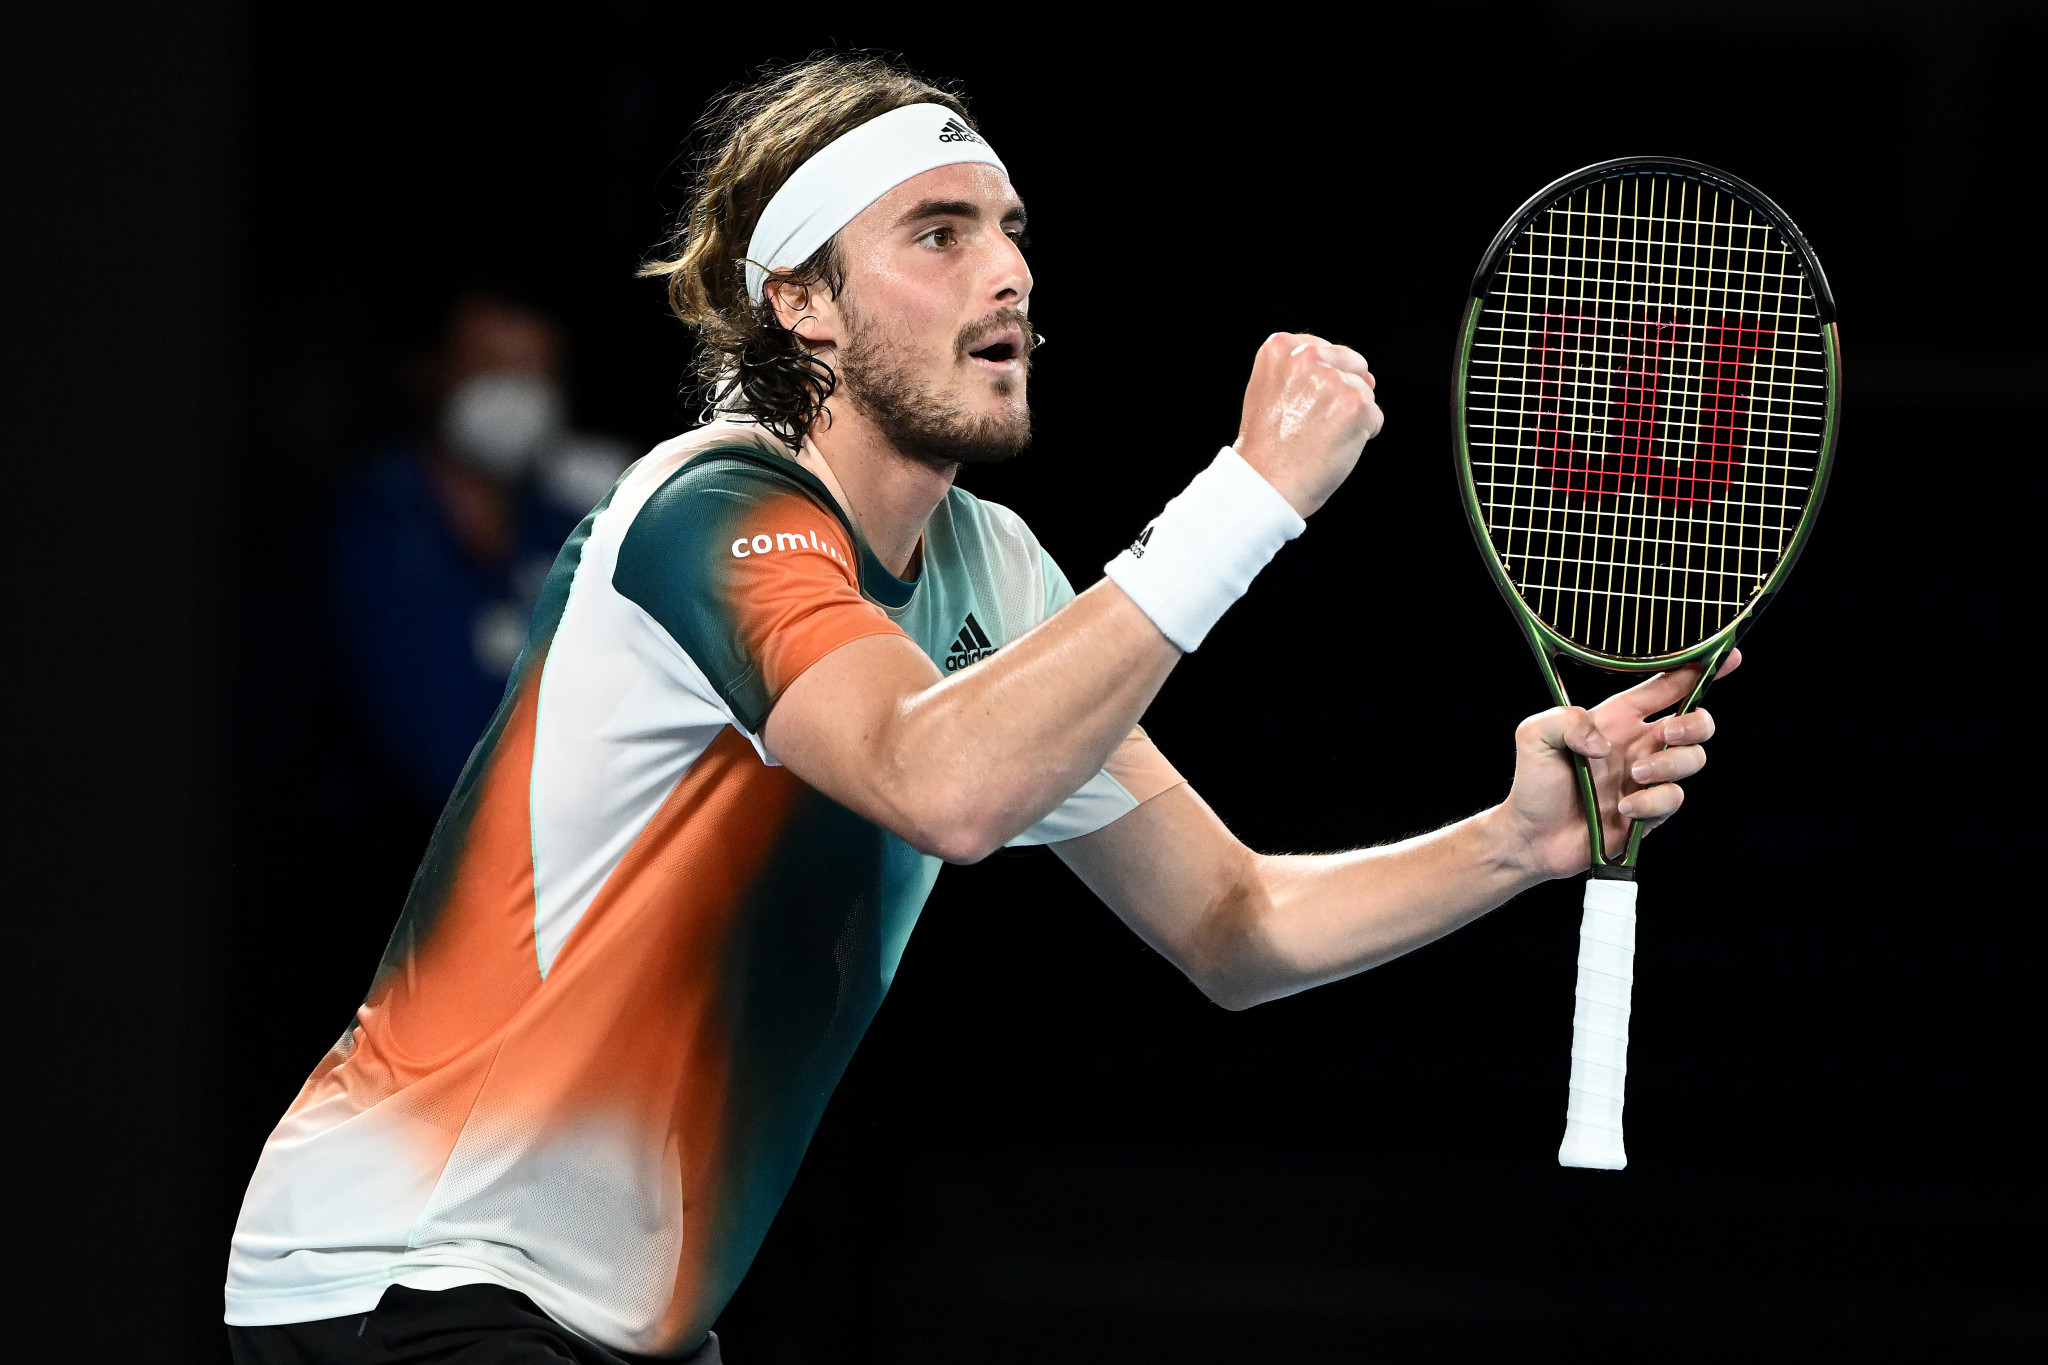 Greece's Stefanos Tsitsipas continued his bid for a first Grand Slam victory by beating American Taylor Fritz in a thrilling five-set tie ©Getty Images